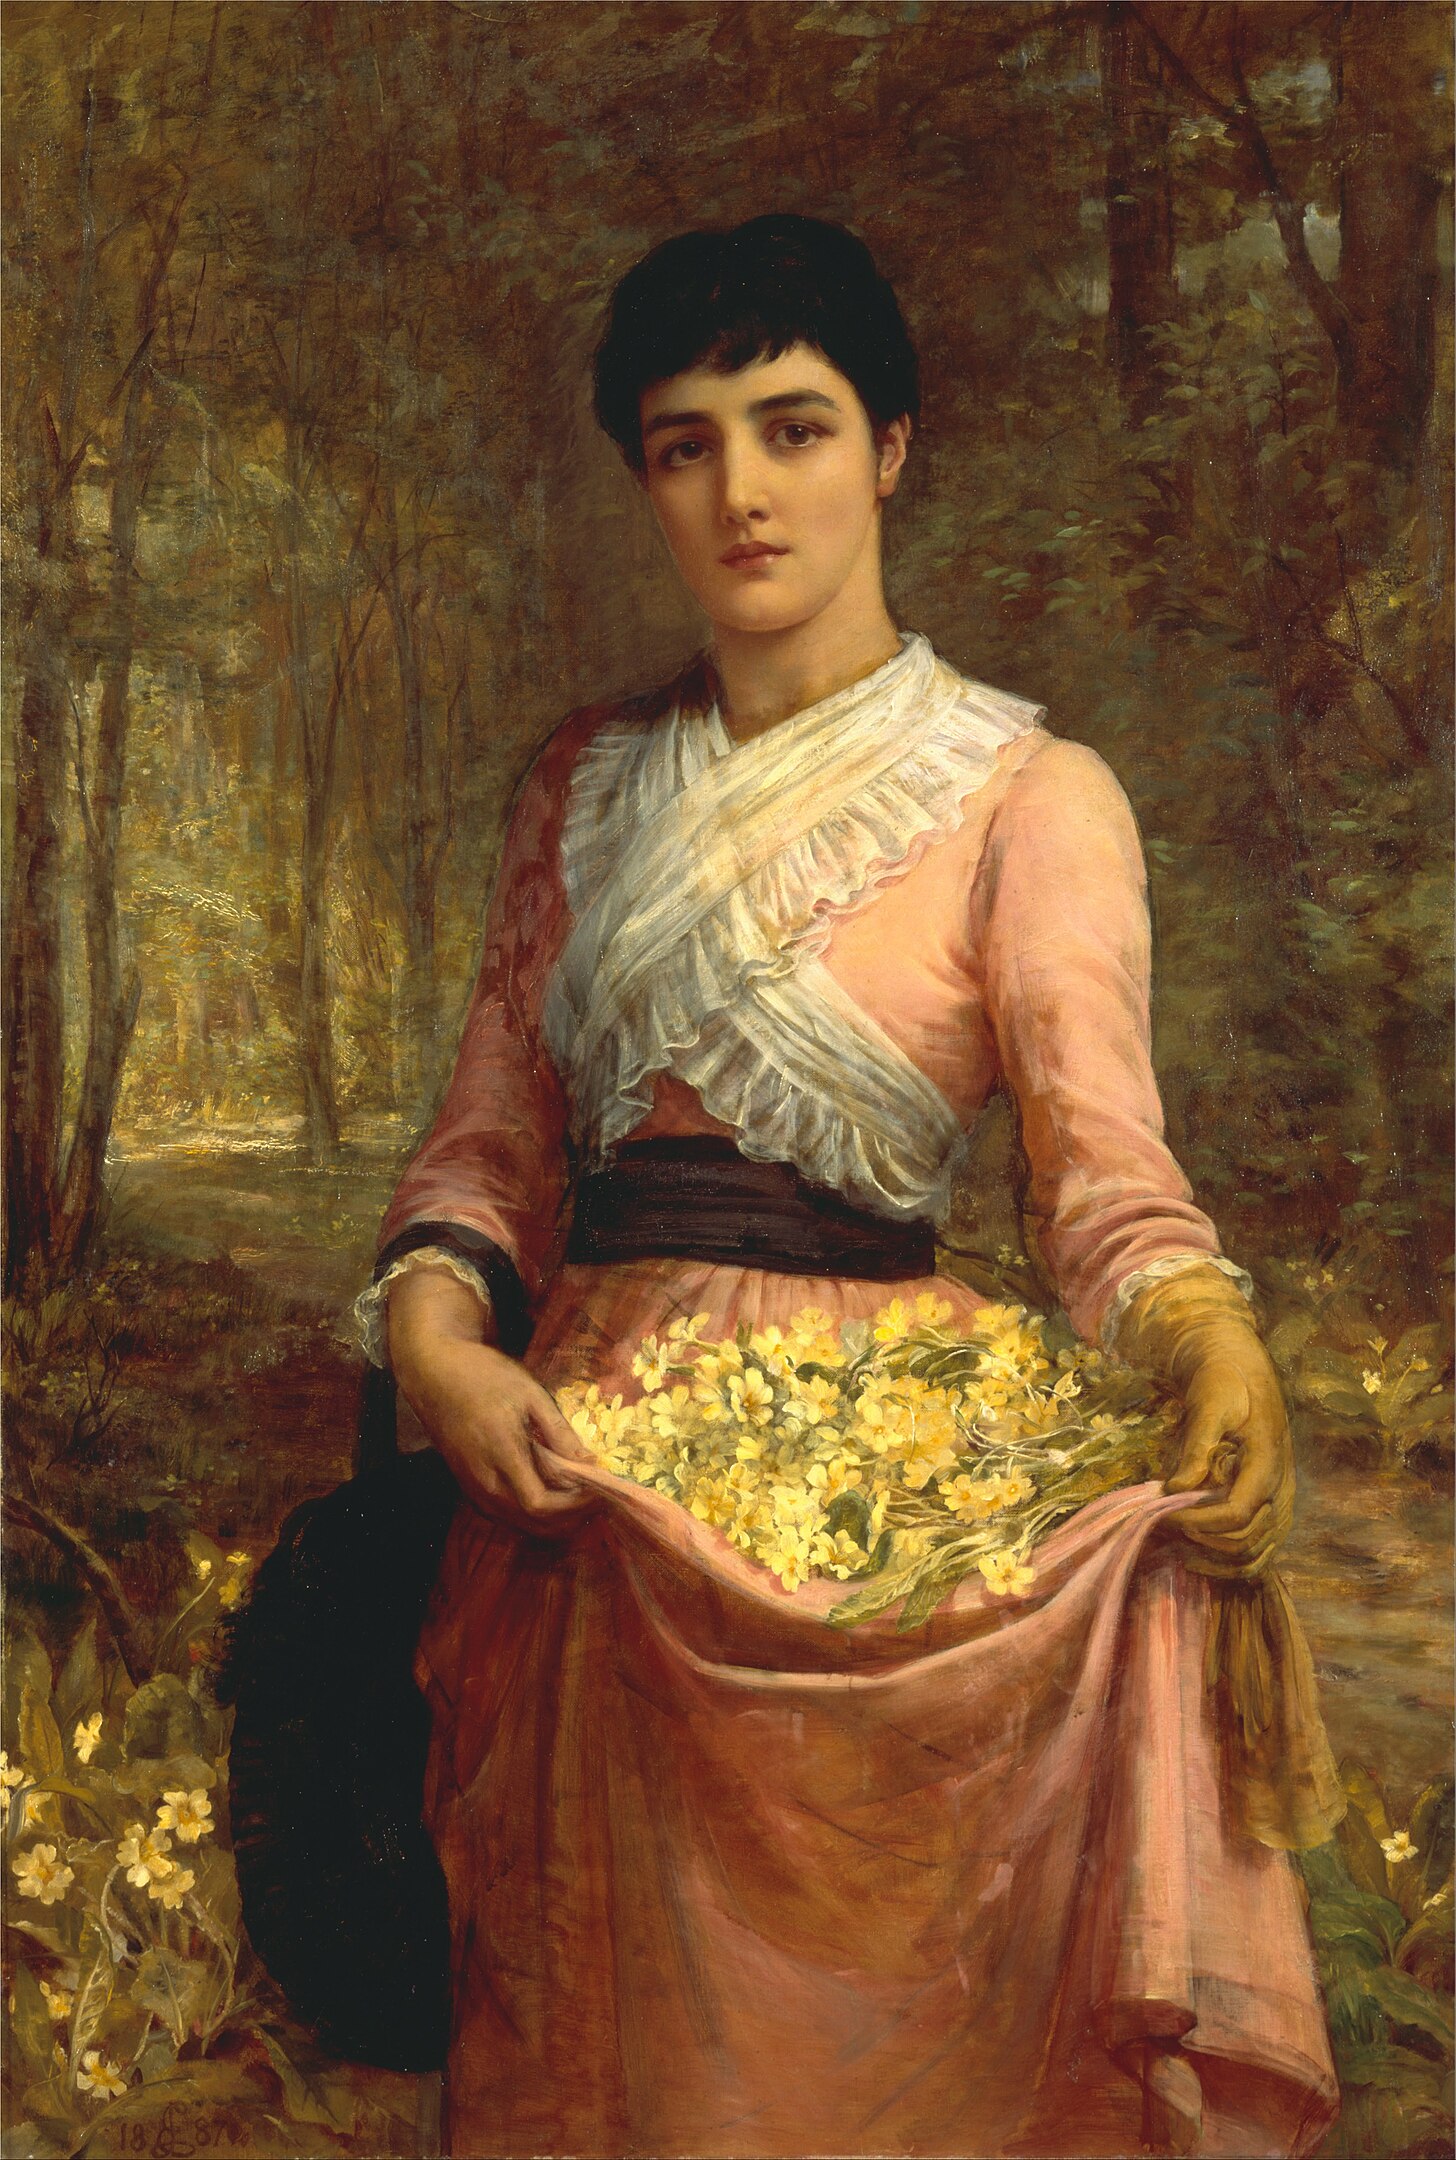 A woman in a forest holding the skirt of her dress to carry flowers